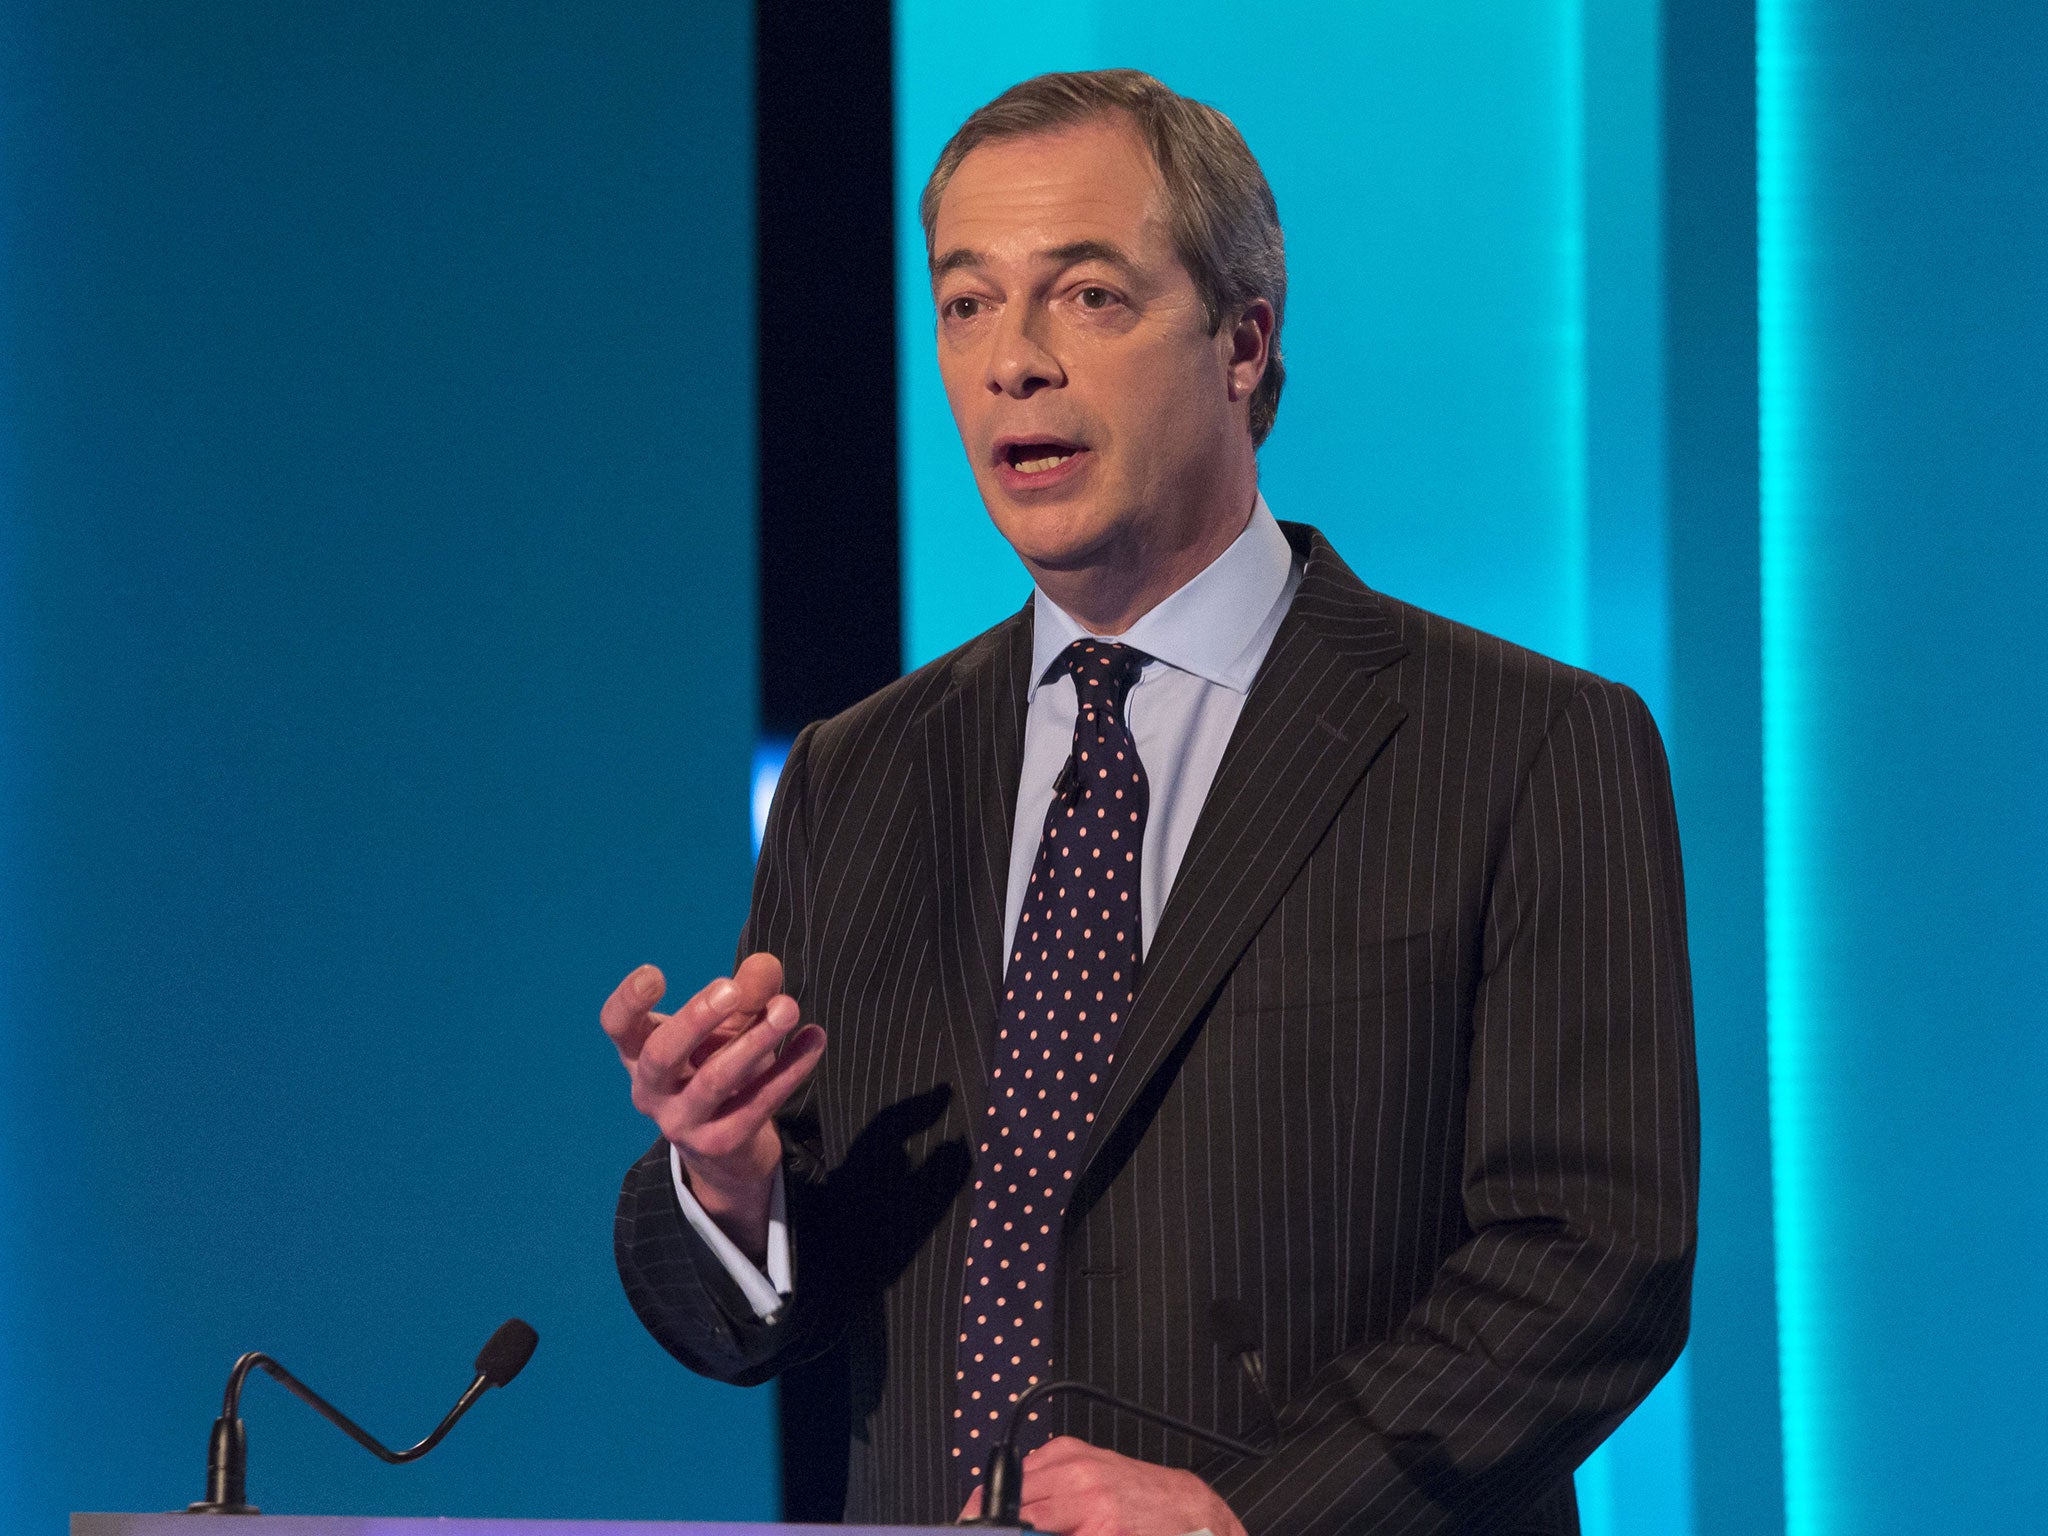 UKIP leader Nigel Farage sparked controversy during the ITV Leader's Debate 2015 for saying that immigrants should not be able to use the NHS for free.